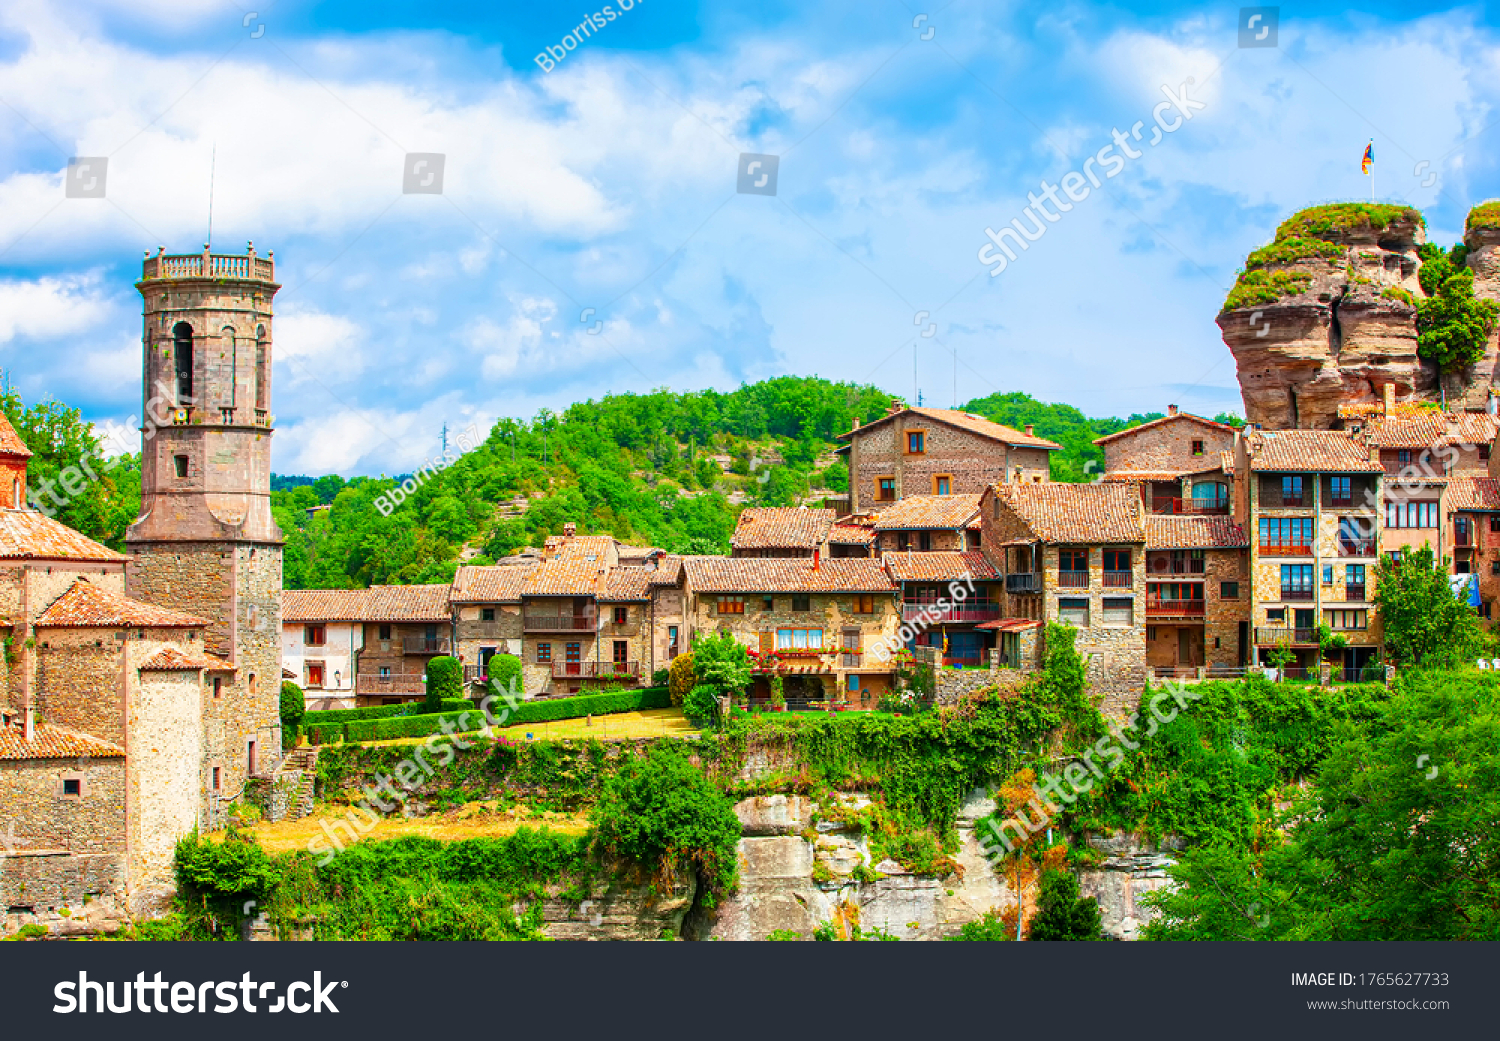 Rupit i Pruit - Medieval Catalan village in the subregion of the Collsacabra, Spain #1765627733